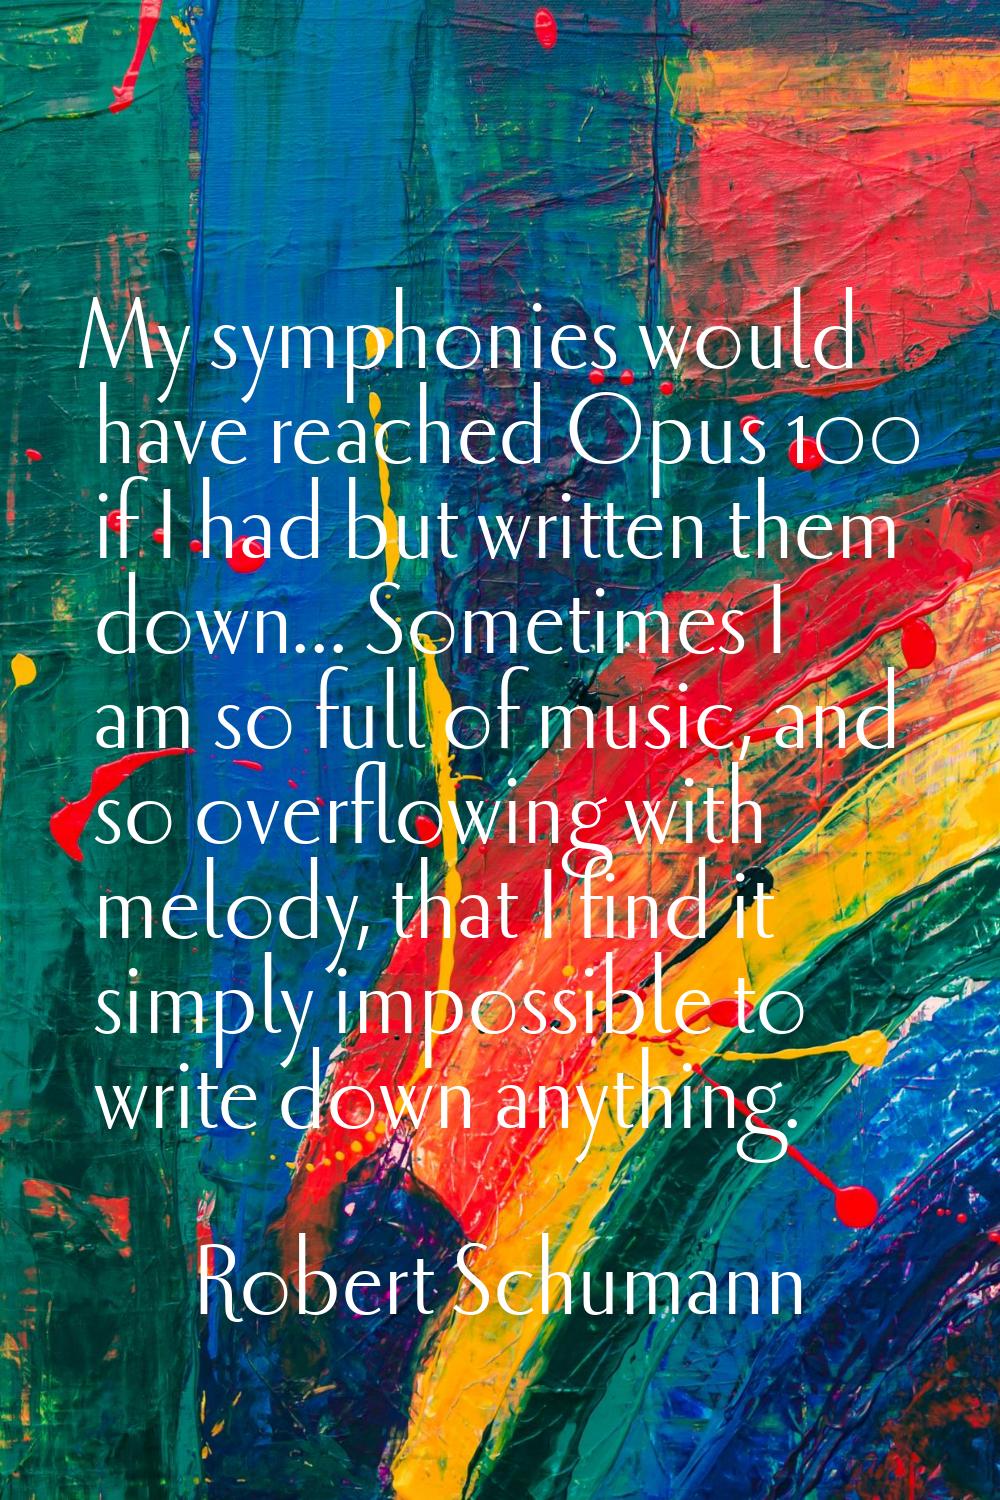 My symphonies would have reached Opus 100 if I had but written them down... Sometimes I am so full 